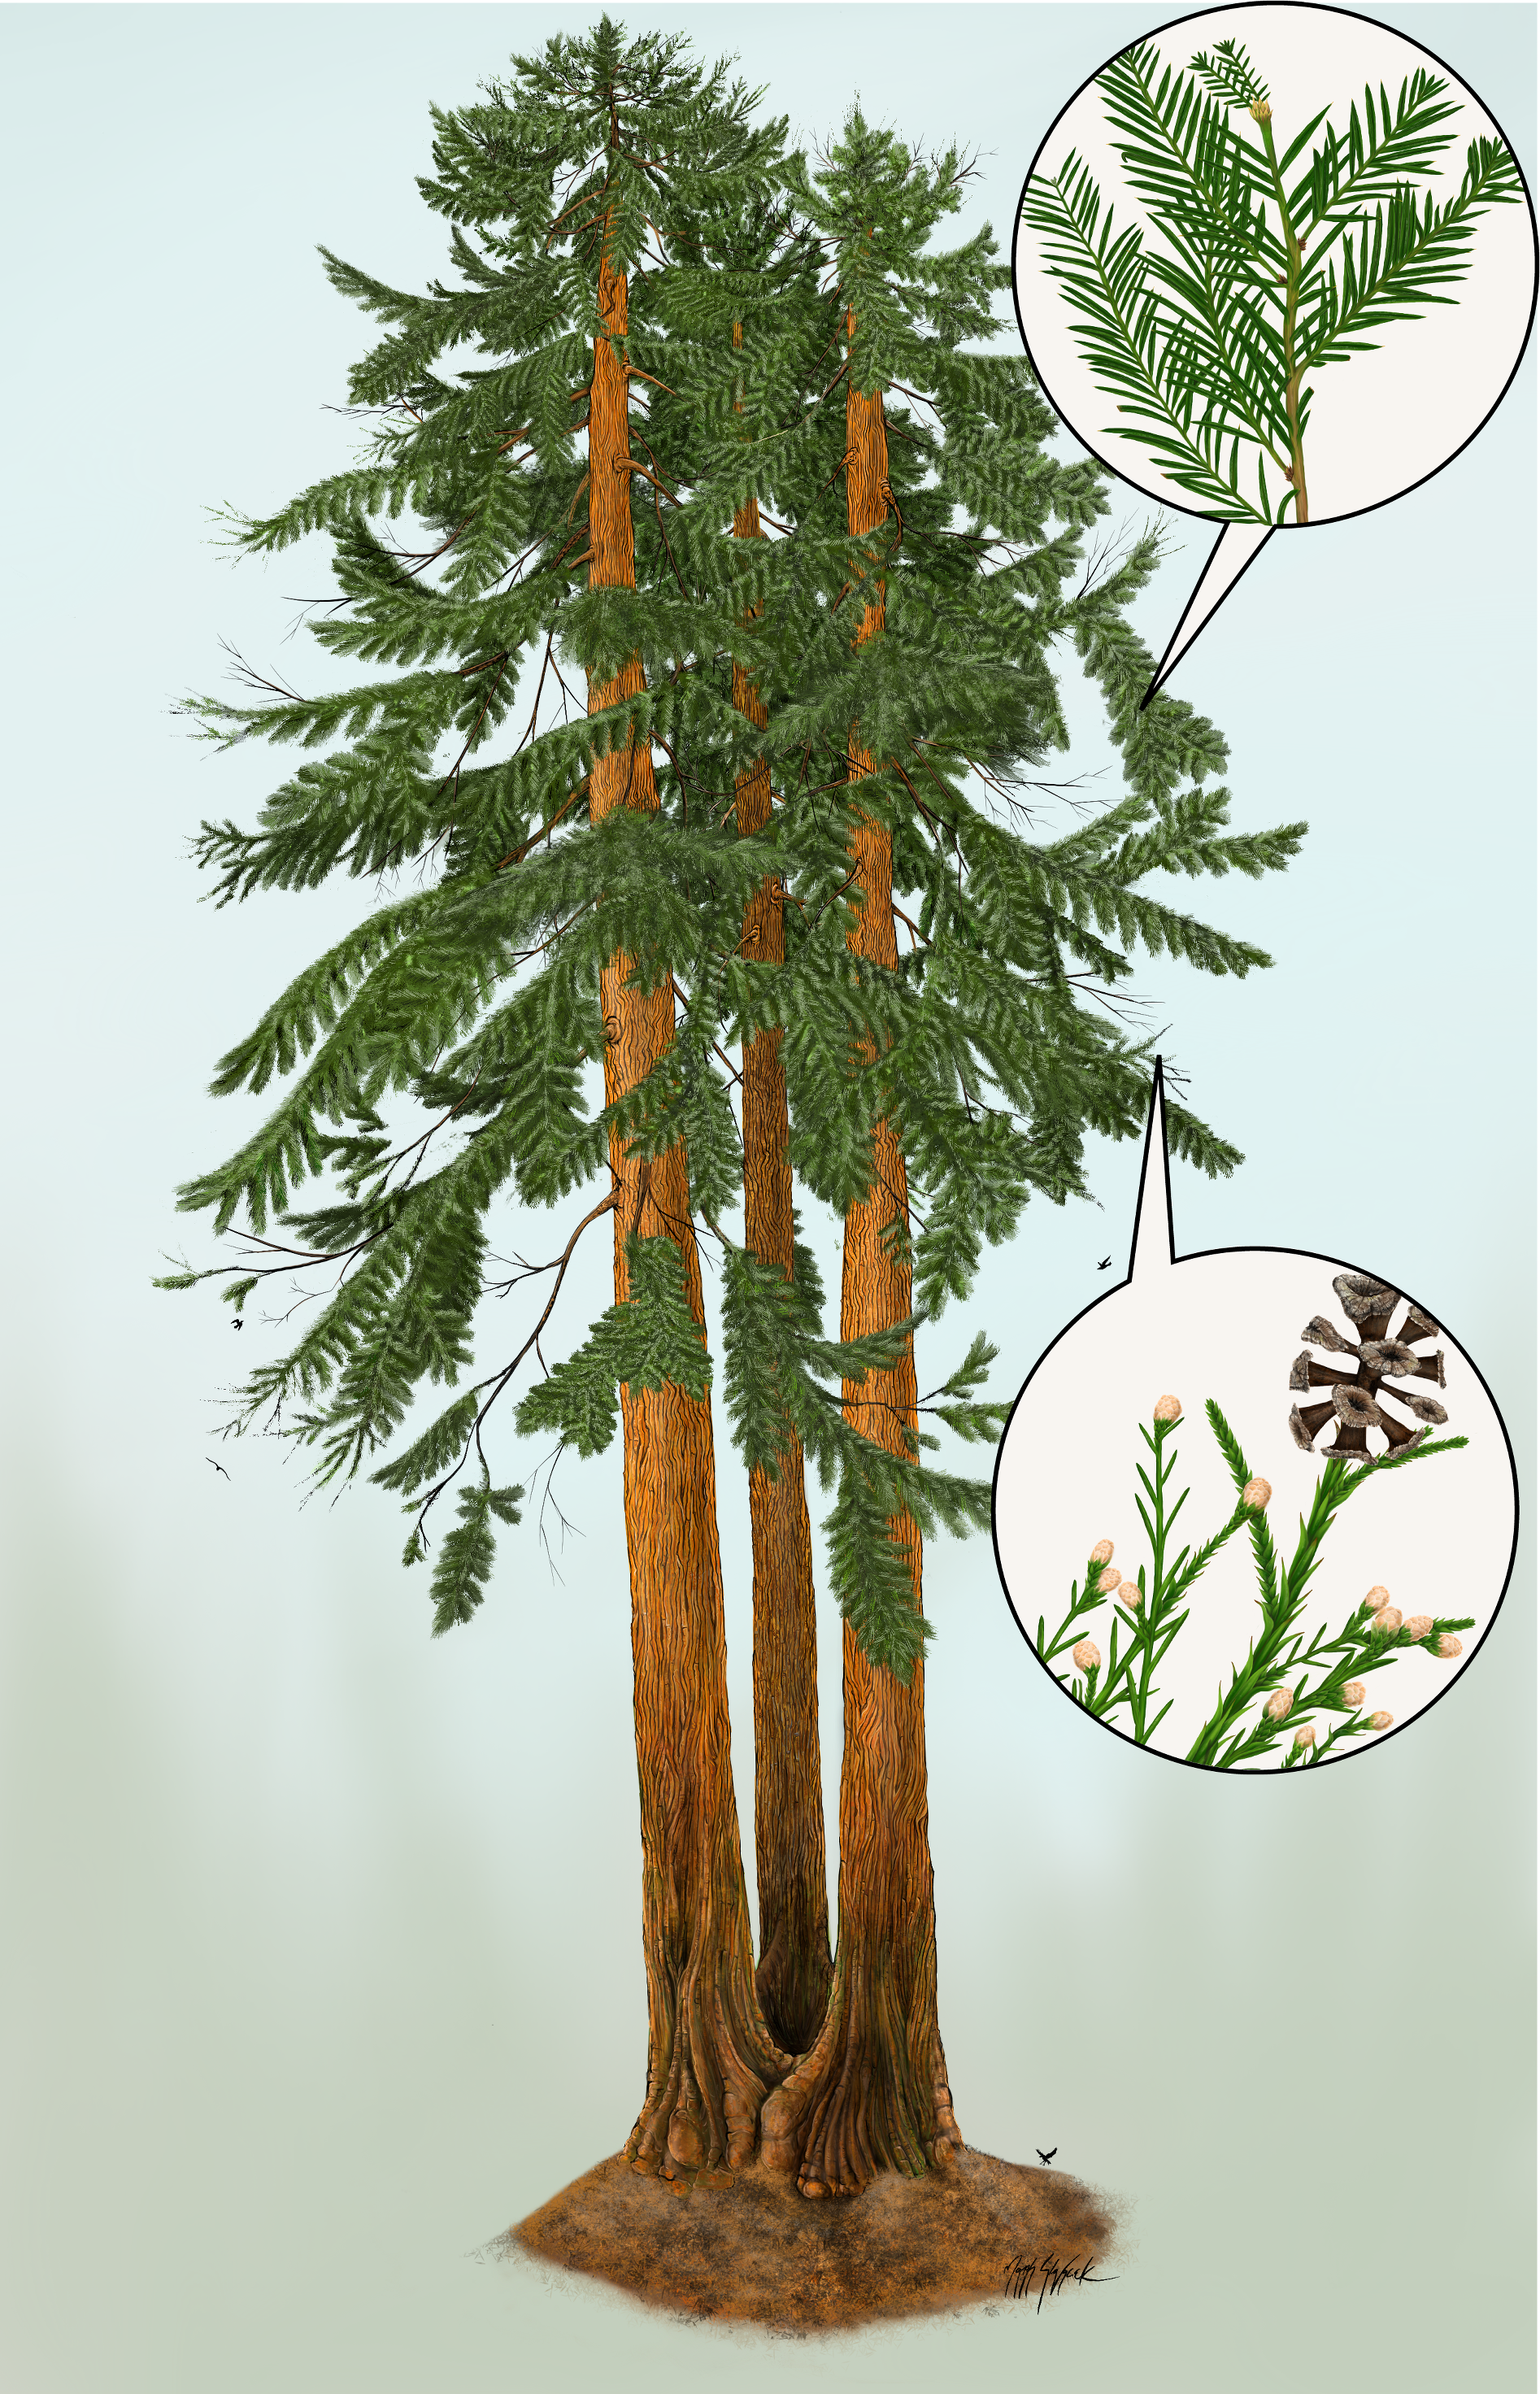 Artist reconstruction of the fossil redwood trio at full size with two blow outs showing what the foliage might have looked like. The top blowout circle shows normal needles. The bottom blowout circle shows the two kinds of cone and short needled foliage.